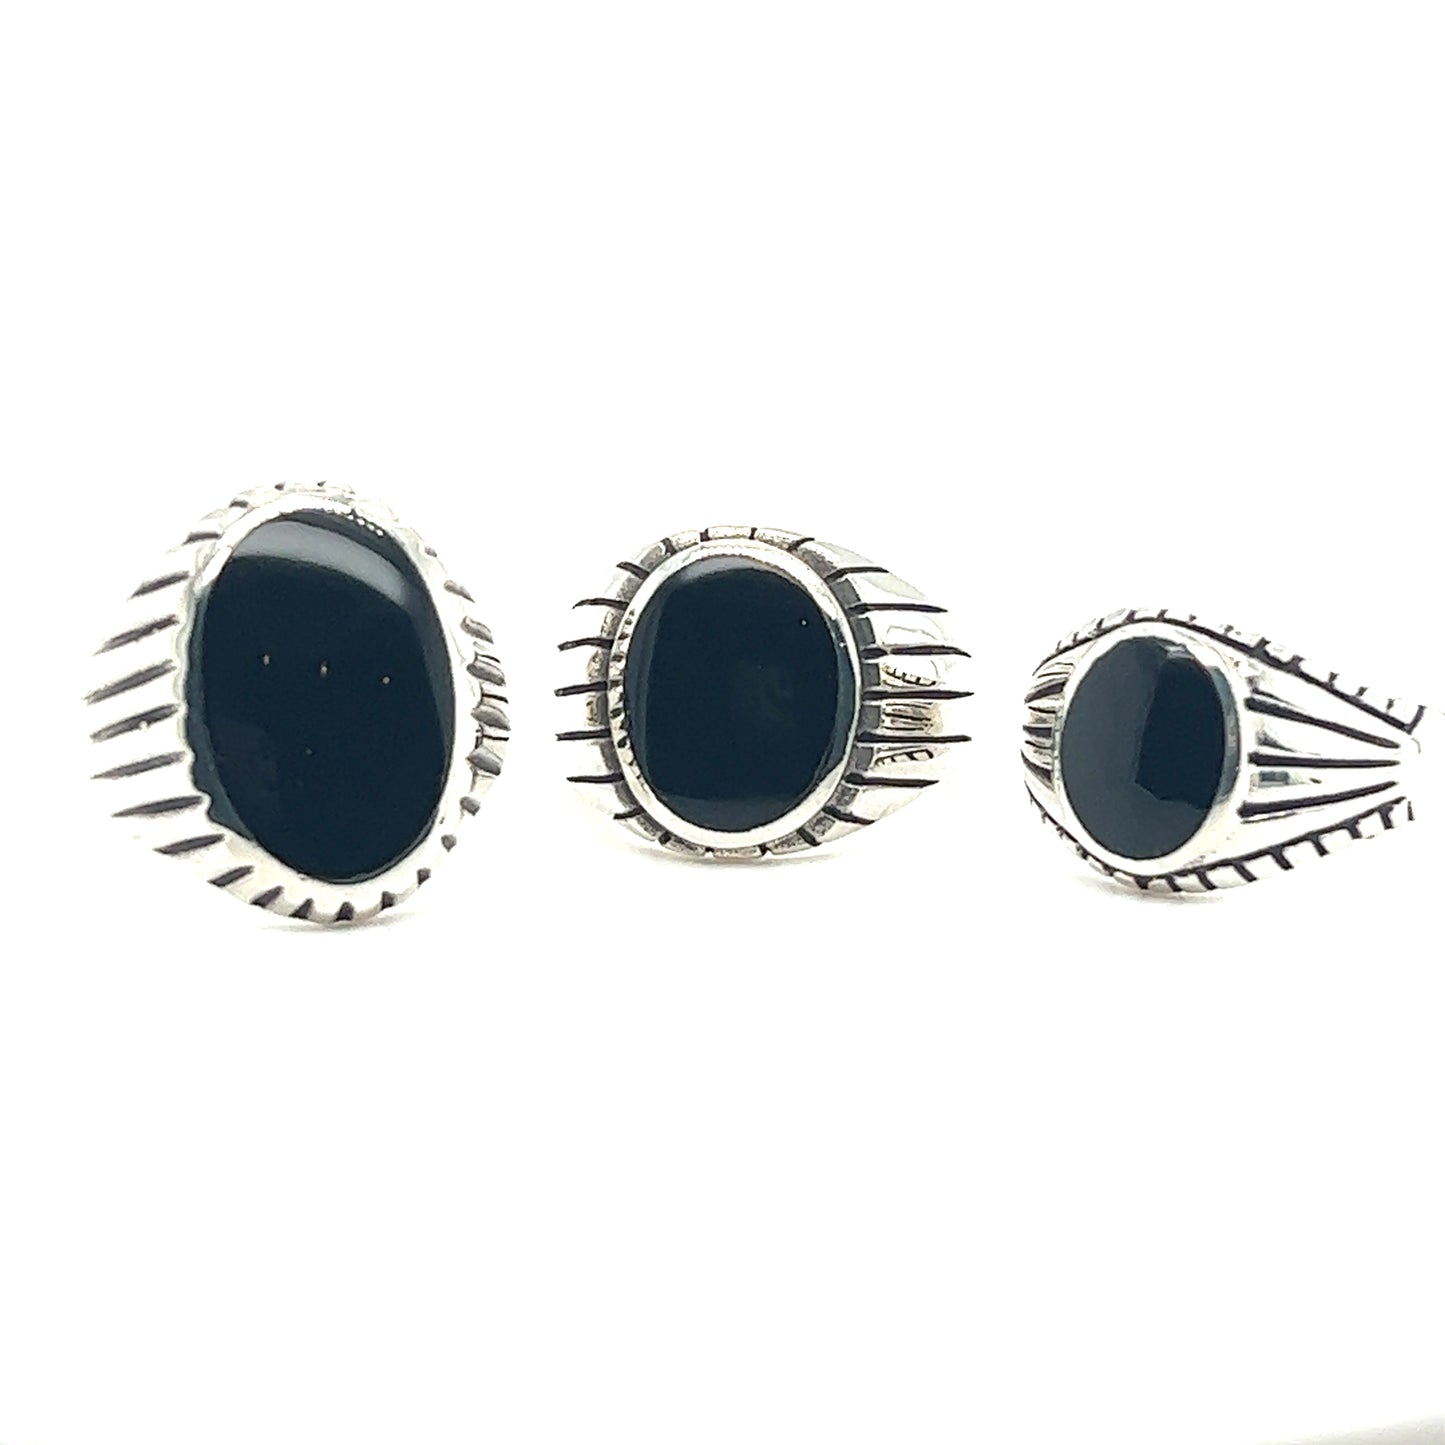 Three Oval Onyx Rings With Fine Oxidized Scale Pattern.